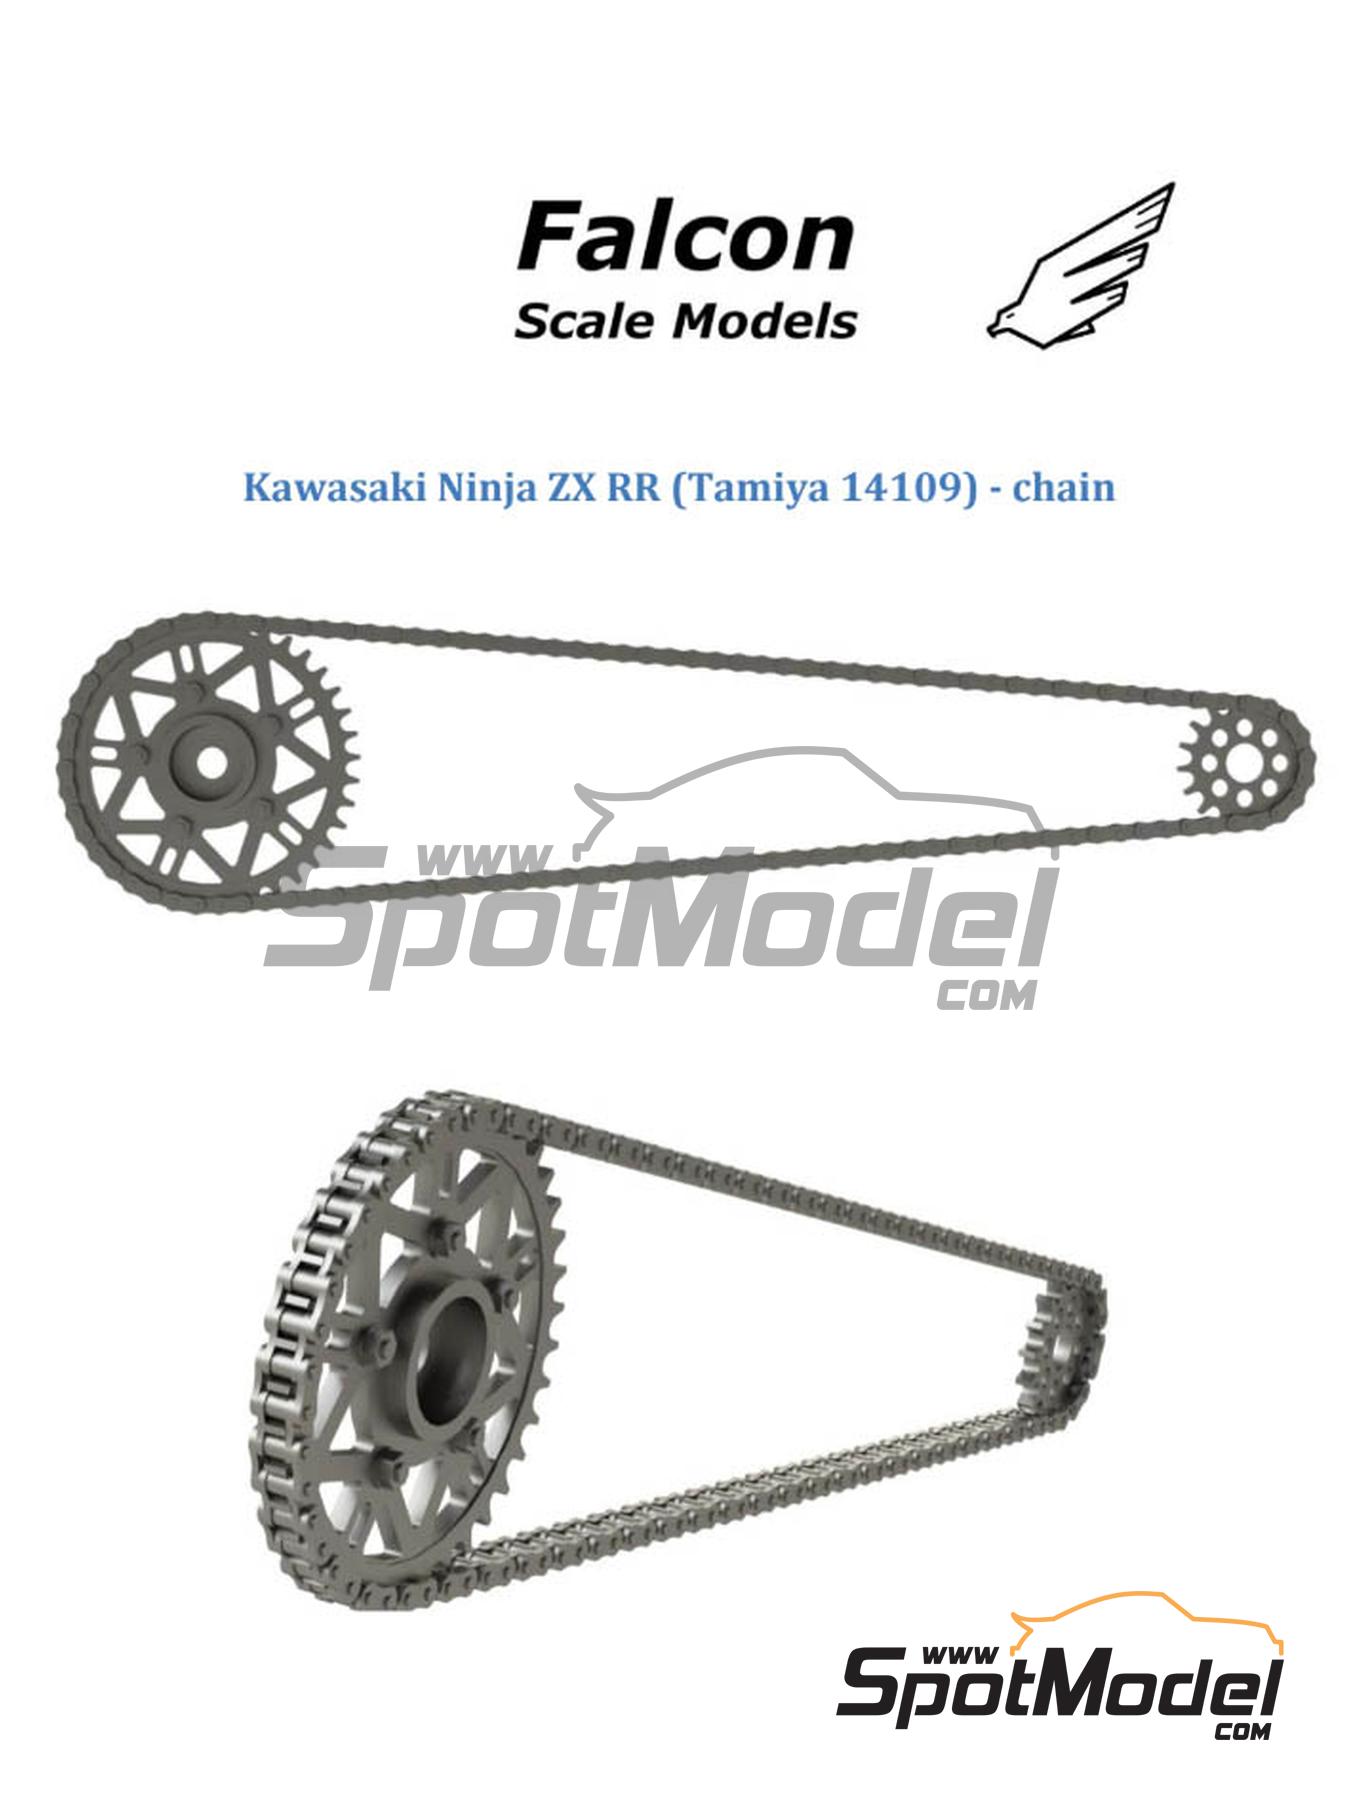 Kawasaki Ninja ZX-RR. Chain set in 1/12 scale manufactured by Falcon Scale  Models (ref. FSM24, also FSM024)